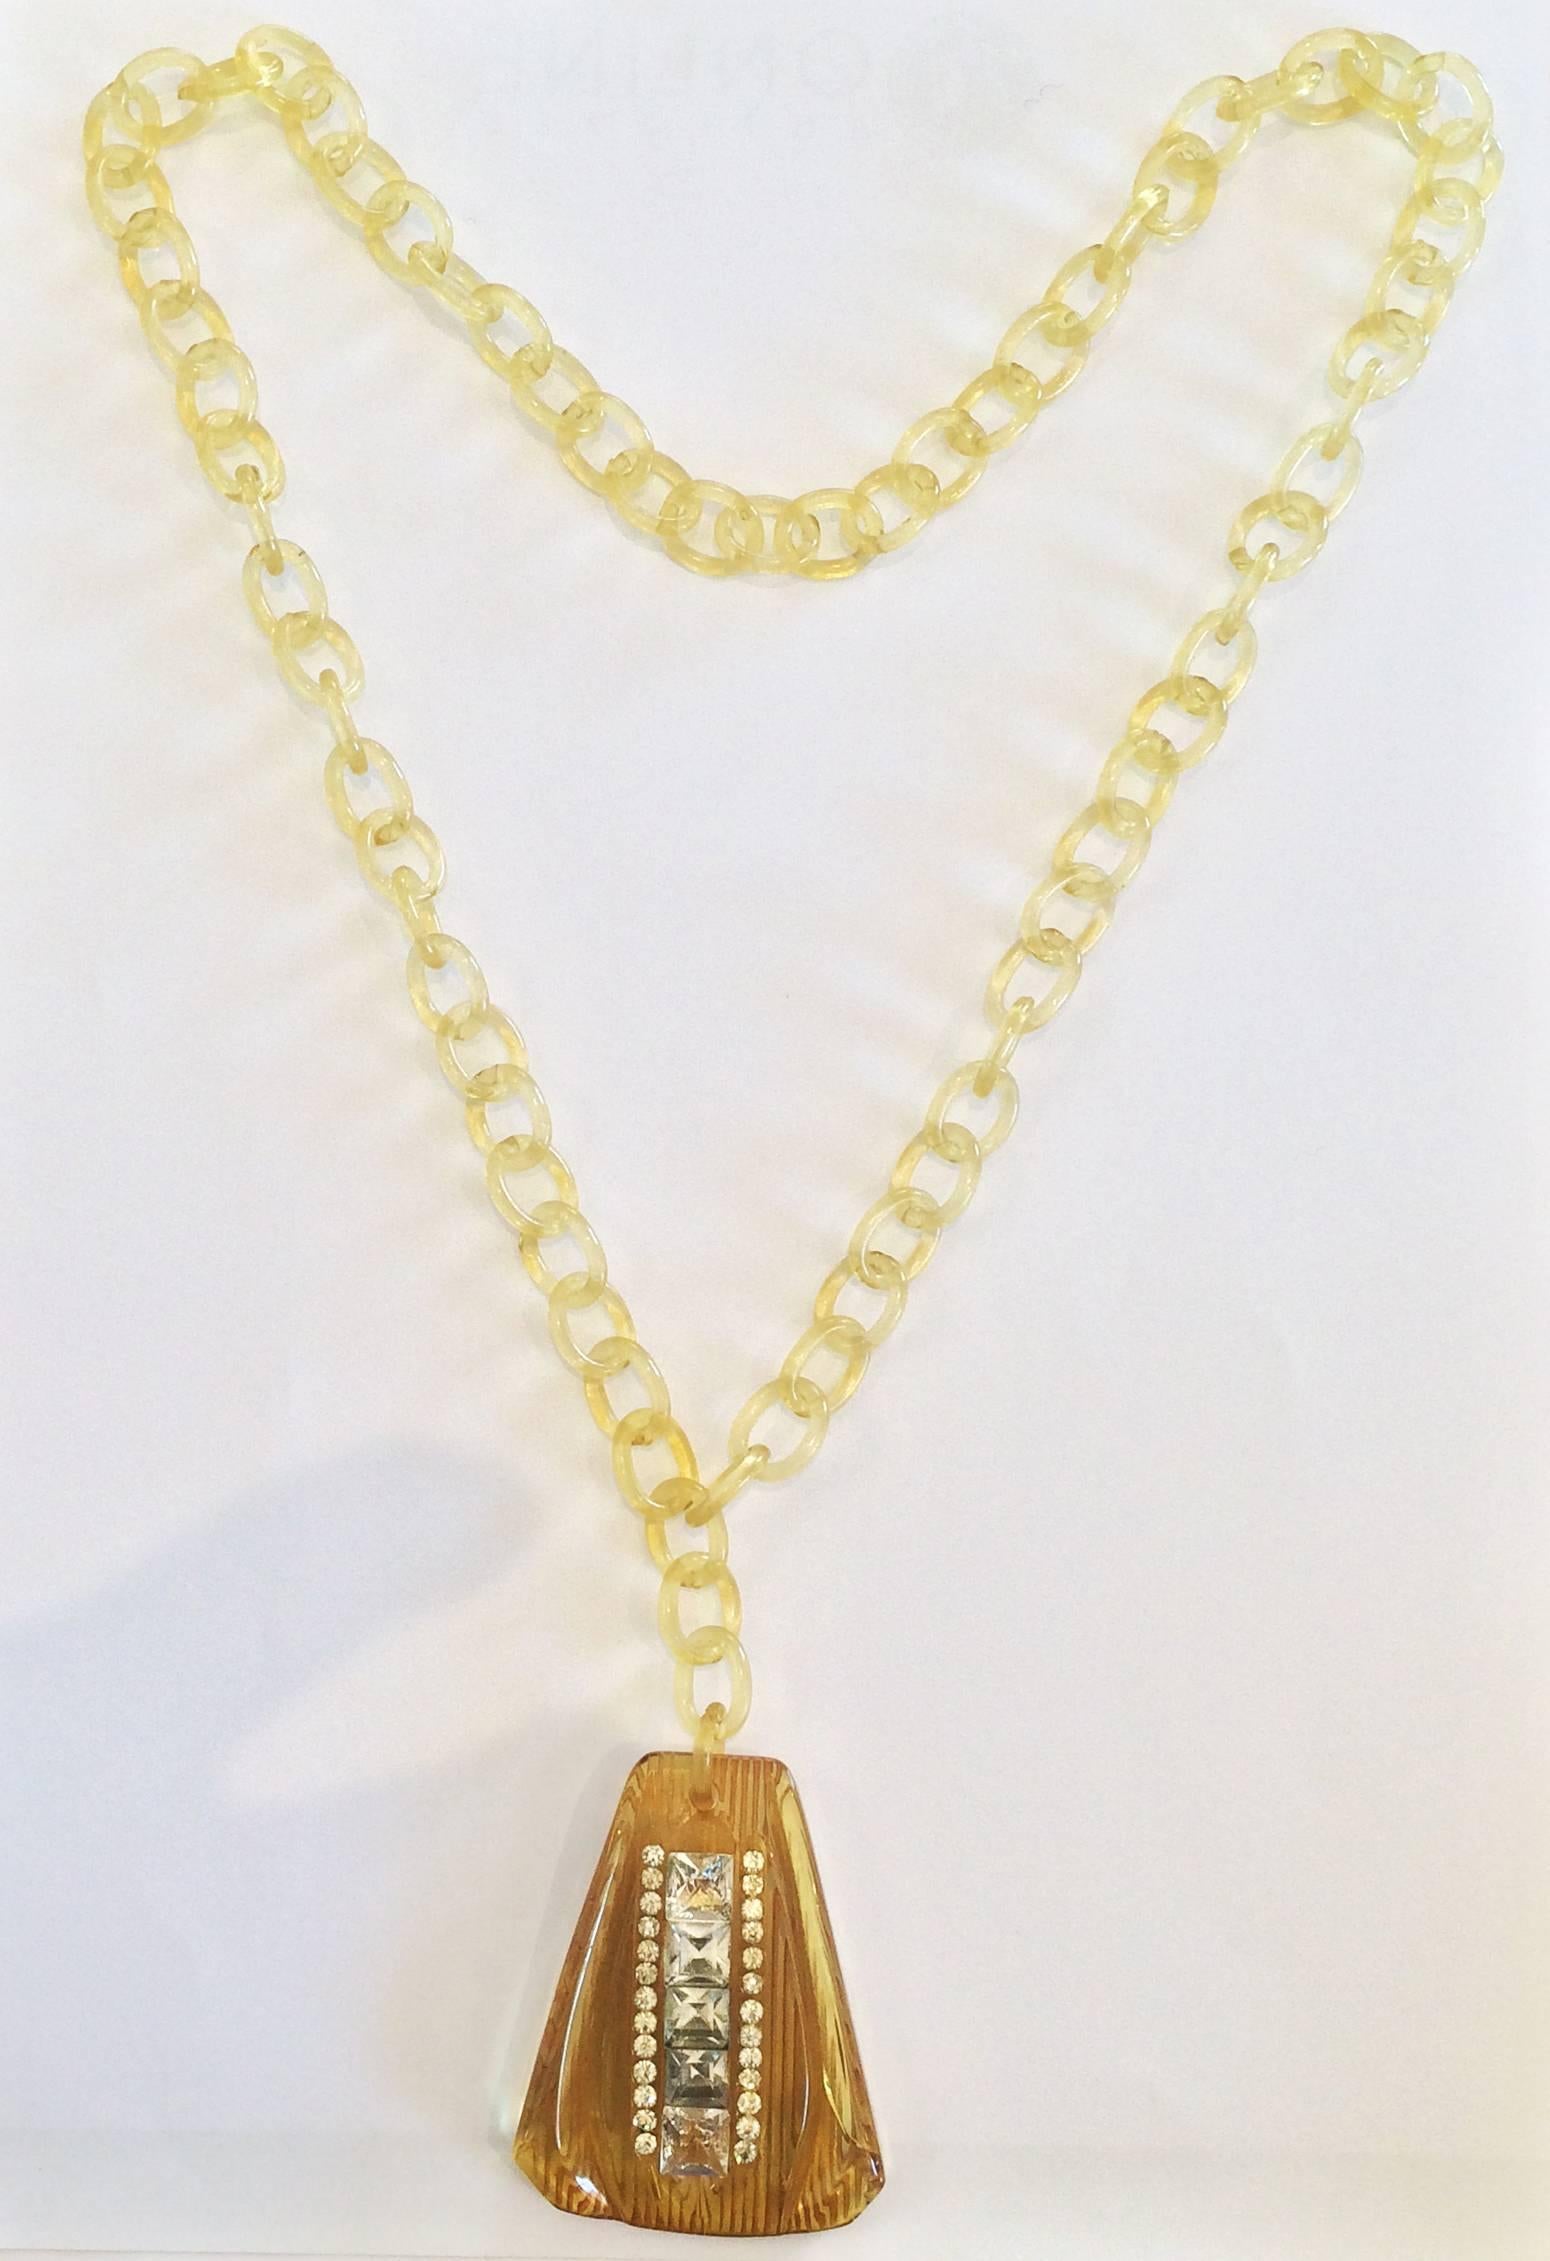 Art Deco necklace, with Applejuice Bakelite Pendant, carved and inset with Baguette rhinestones and including the full celluloid chain, all in perfect condition. Very rare to still have the chain intact with no breakage or losses. The pendant is